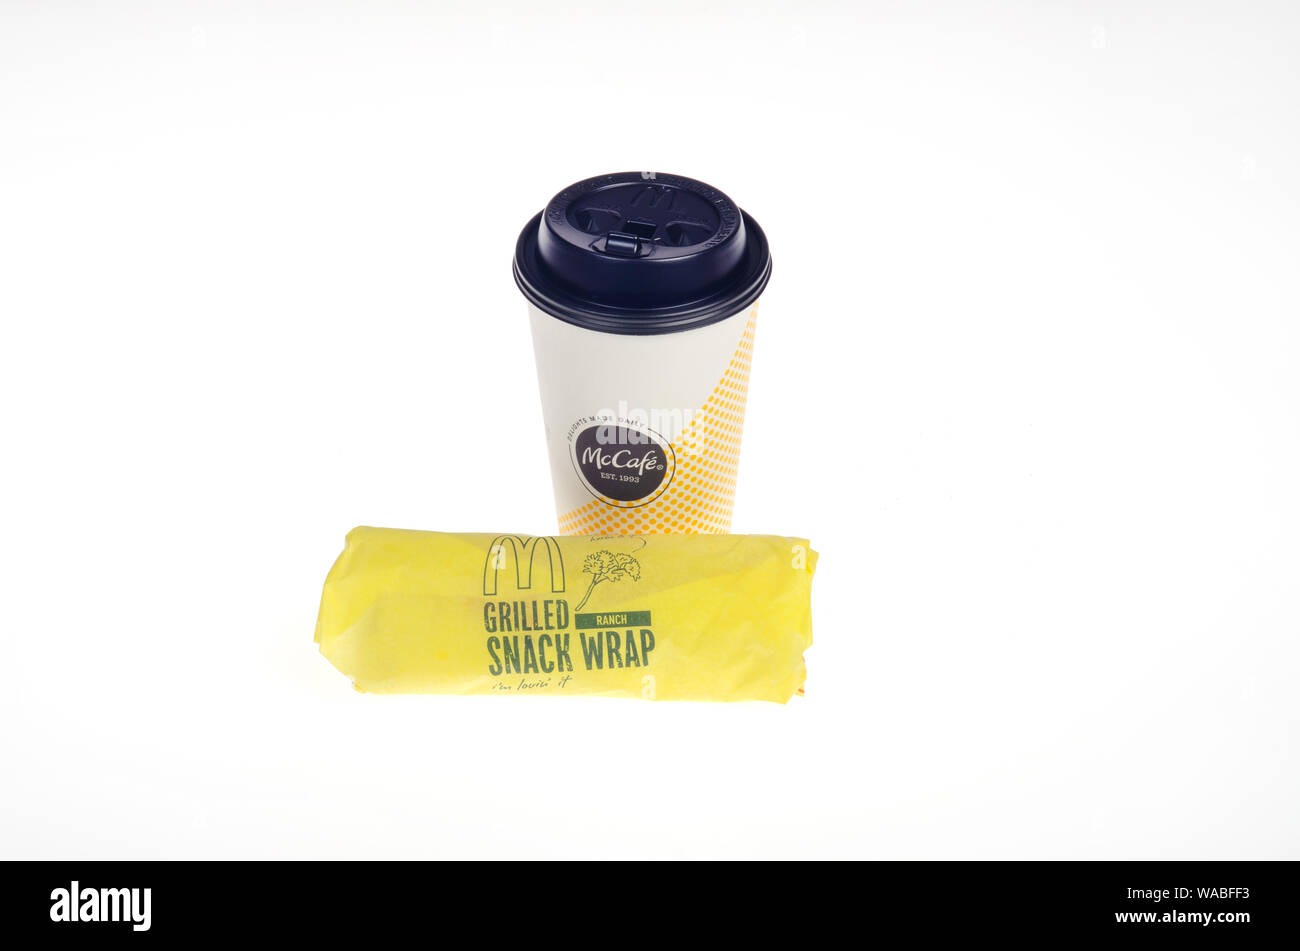 McDonald’s coffee cup with grilled ranch chicken snack wrap Stock Photo